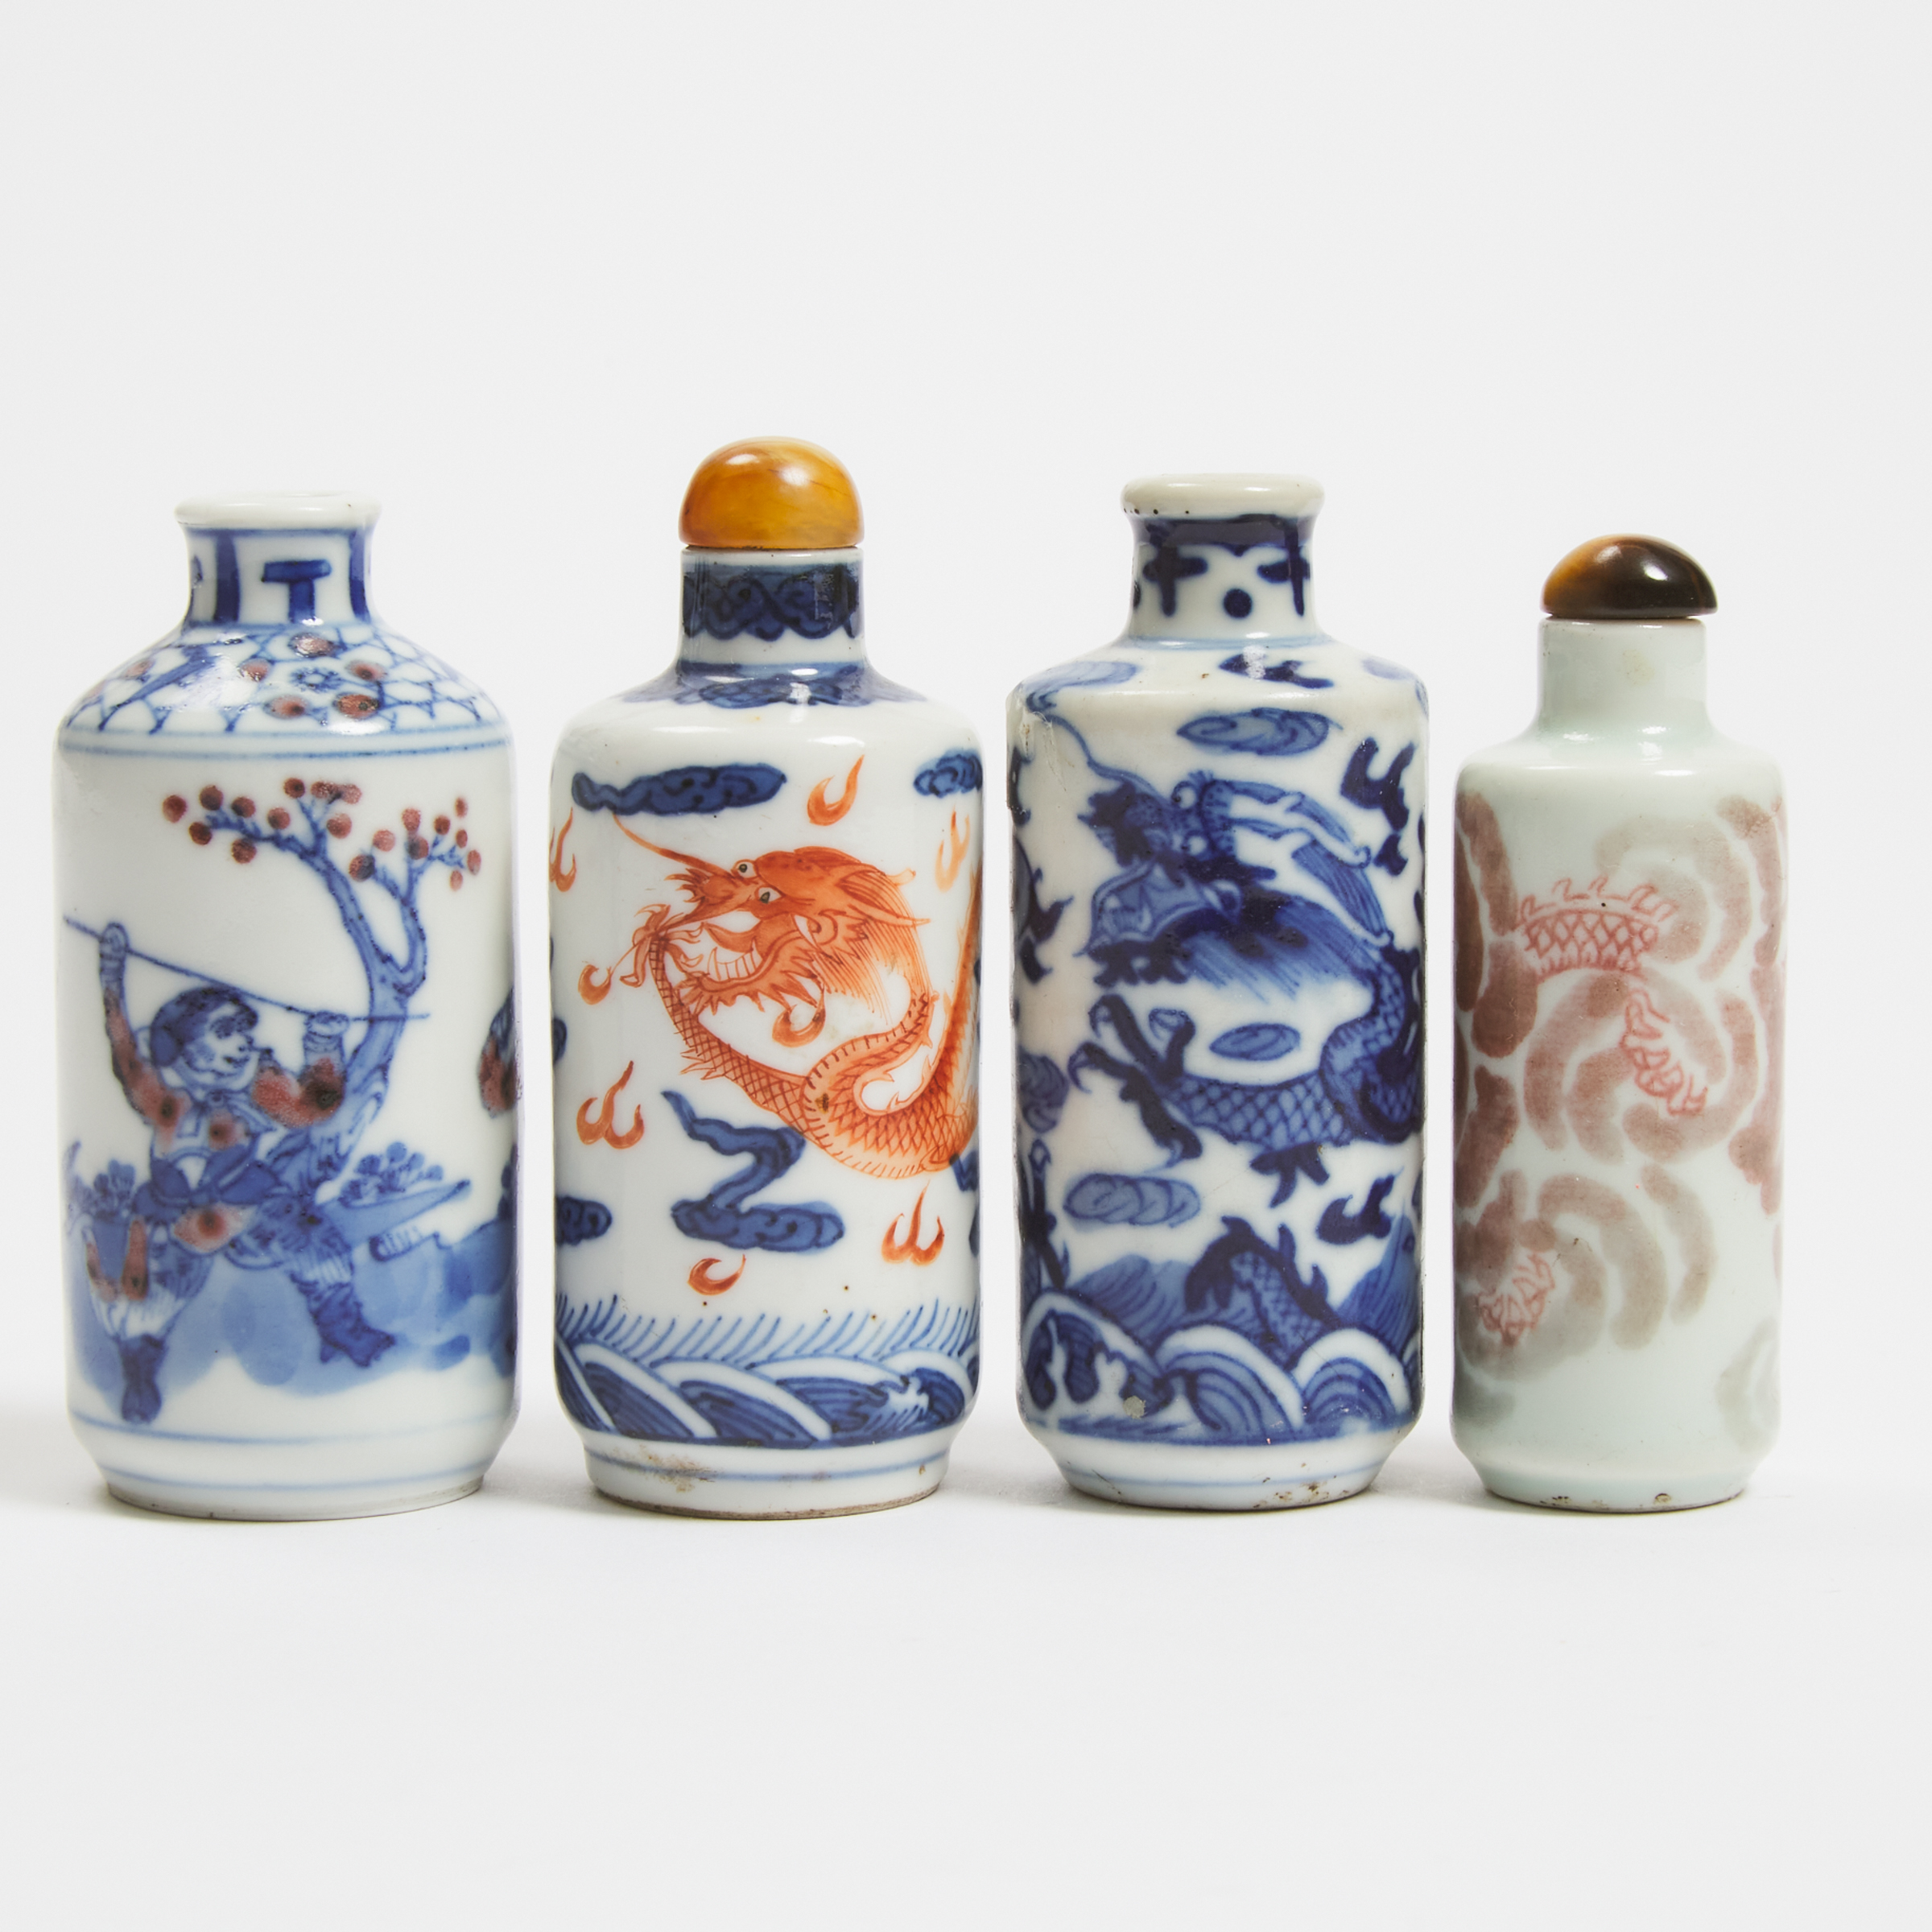 A Group of Four Porcelain Snuff Bottles, 19th Century